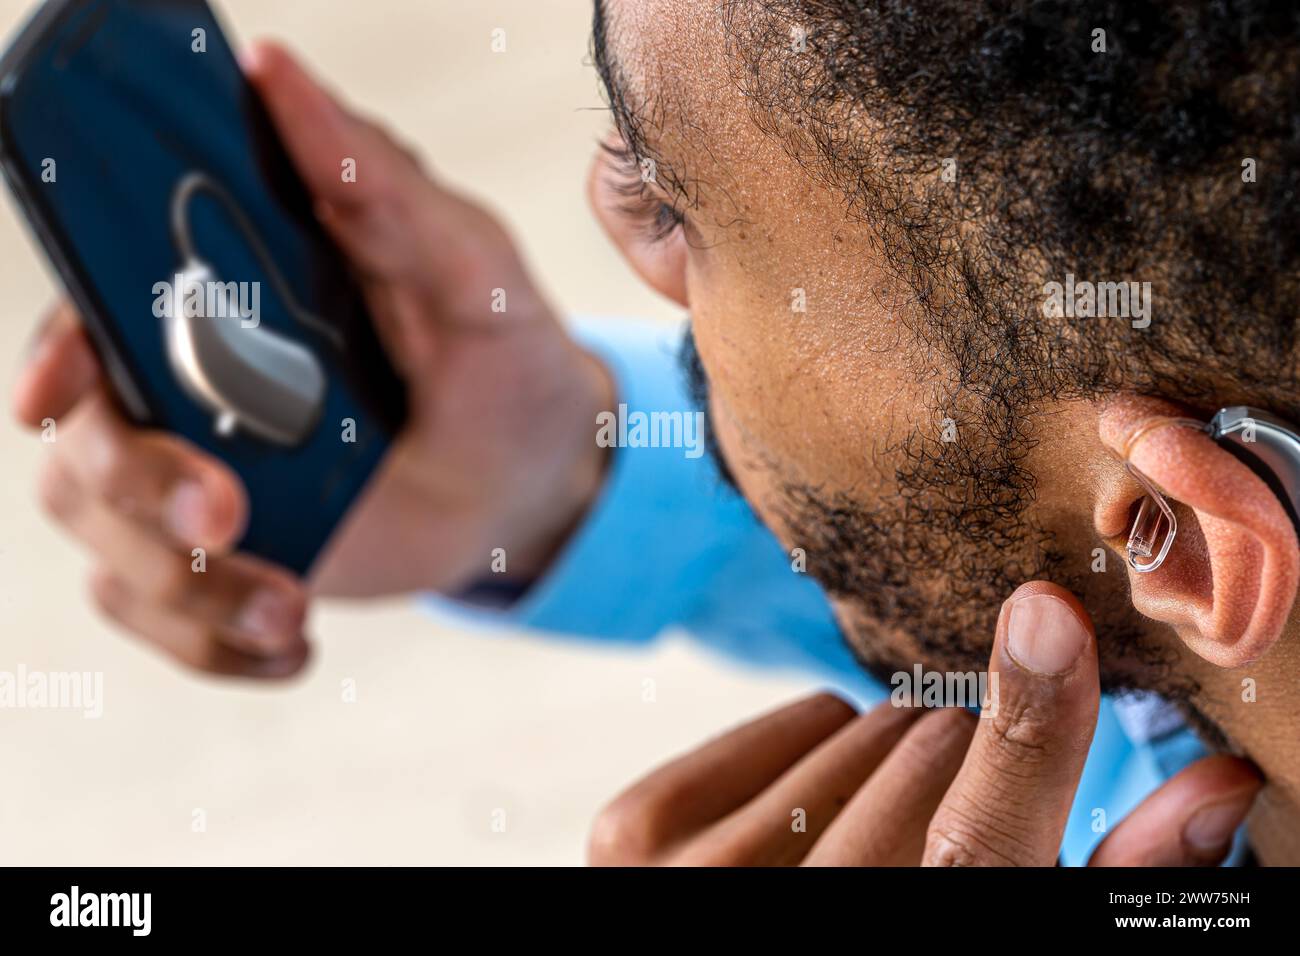 Young man adjusting the volume intensity of the hearing aid with the smartphone. Stock Photo